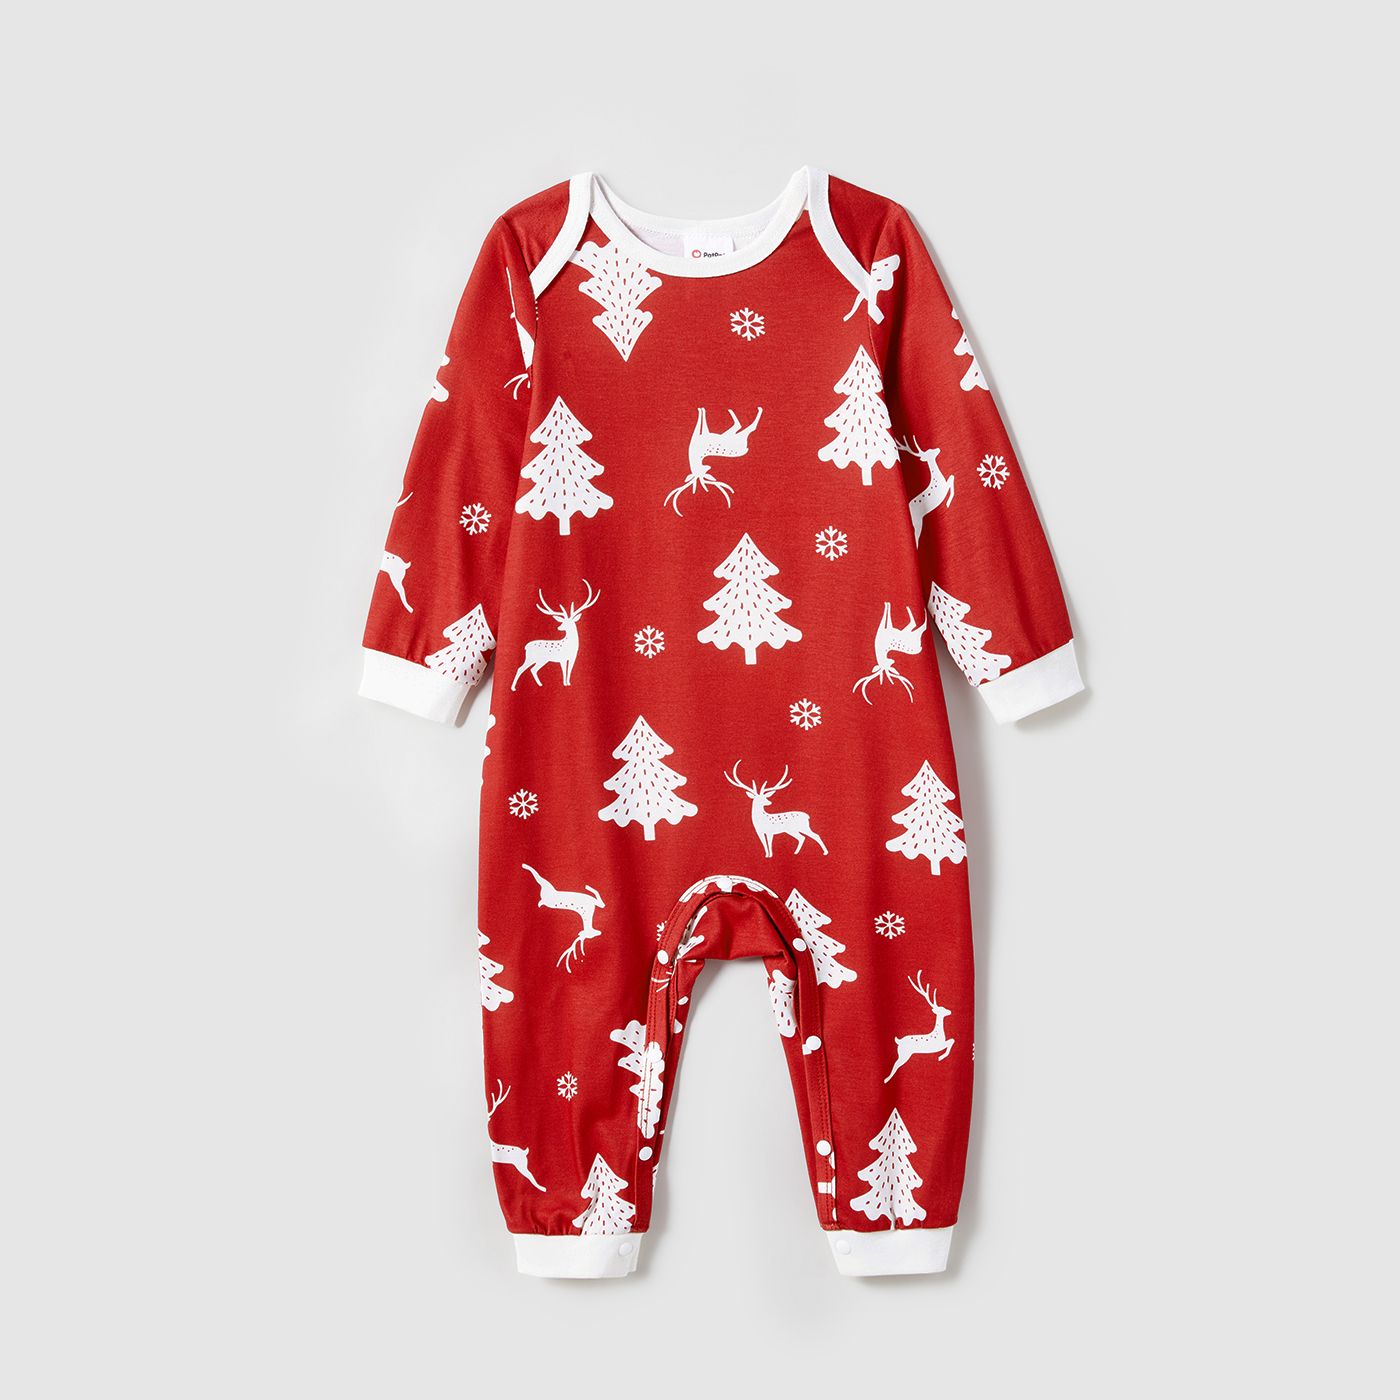 Christmas Tree and Reindeer Allover Print Family Matching Long-sleeve Onesies Pajamas Sets (Flame Re